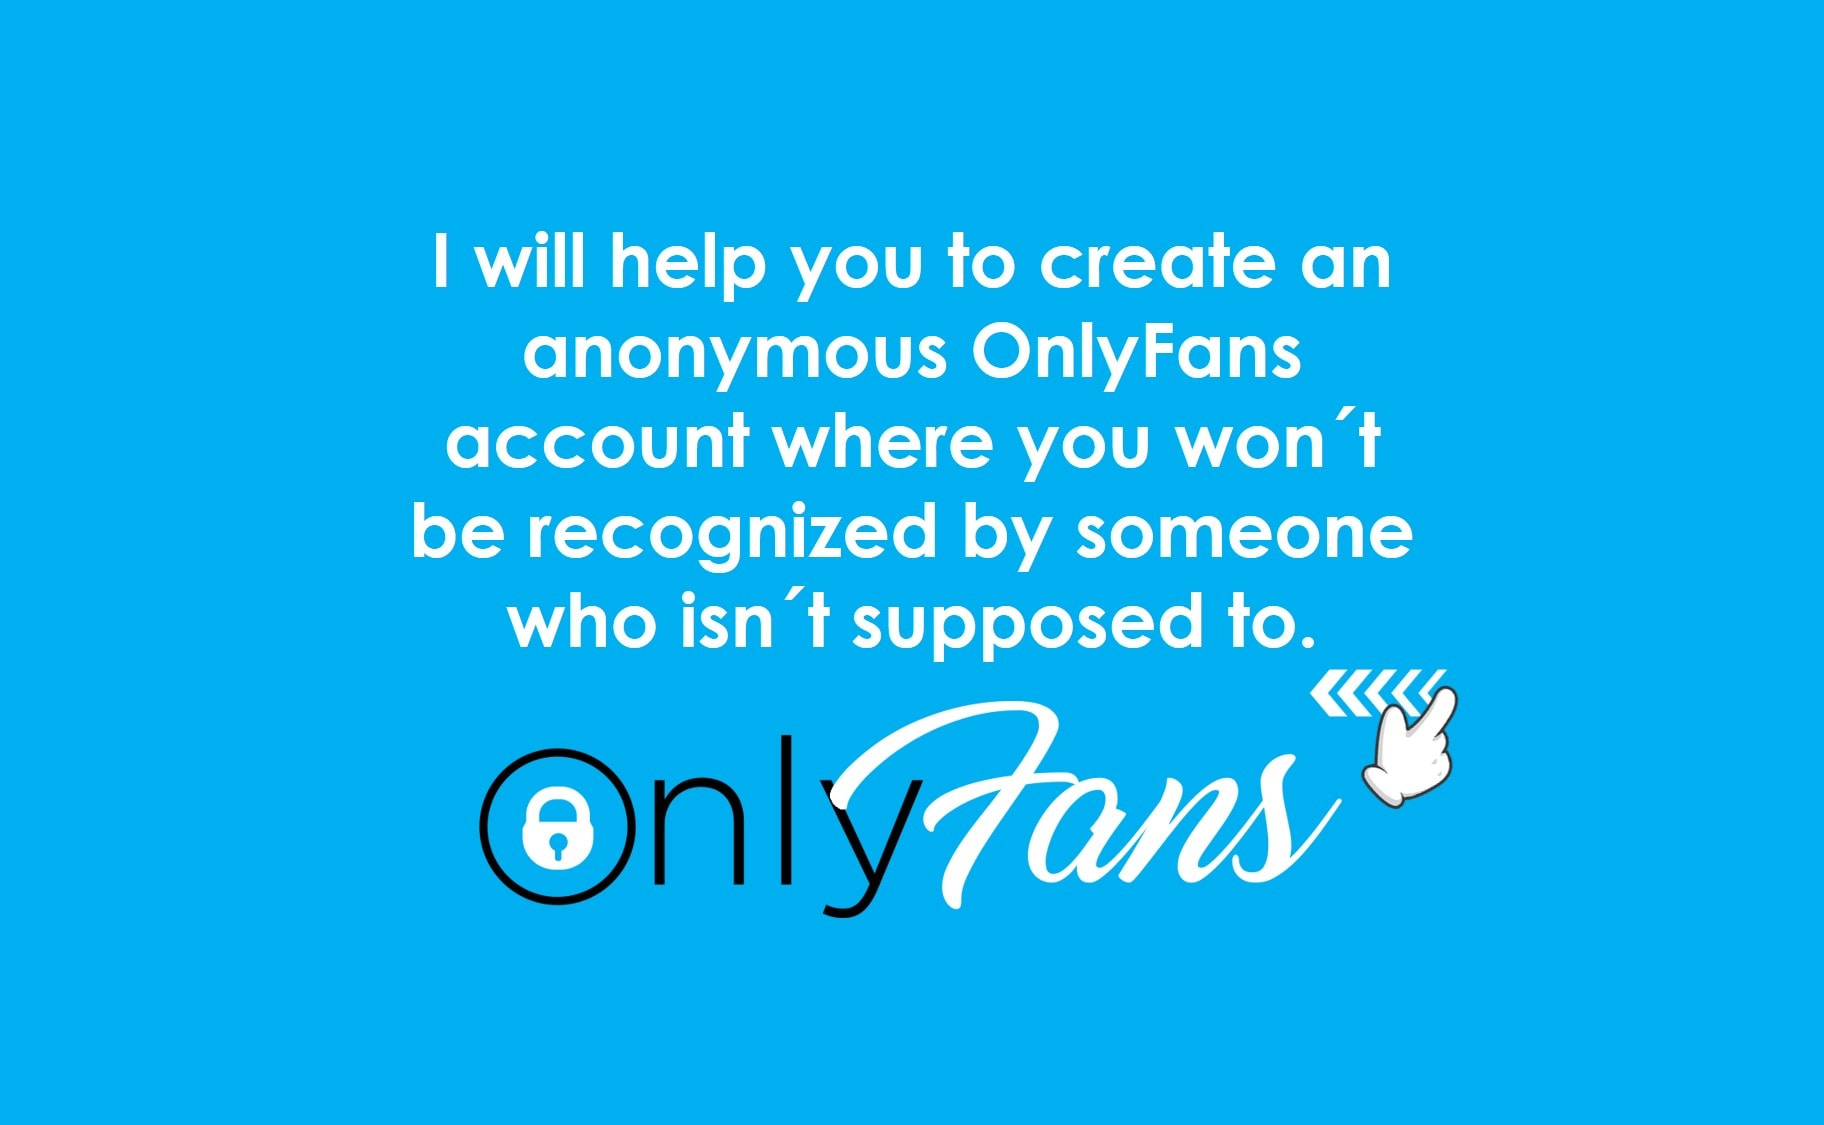 How to subscribe to onlyfans anonymously